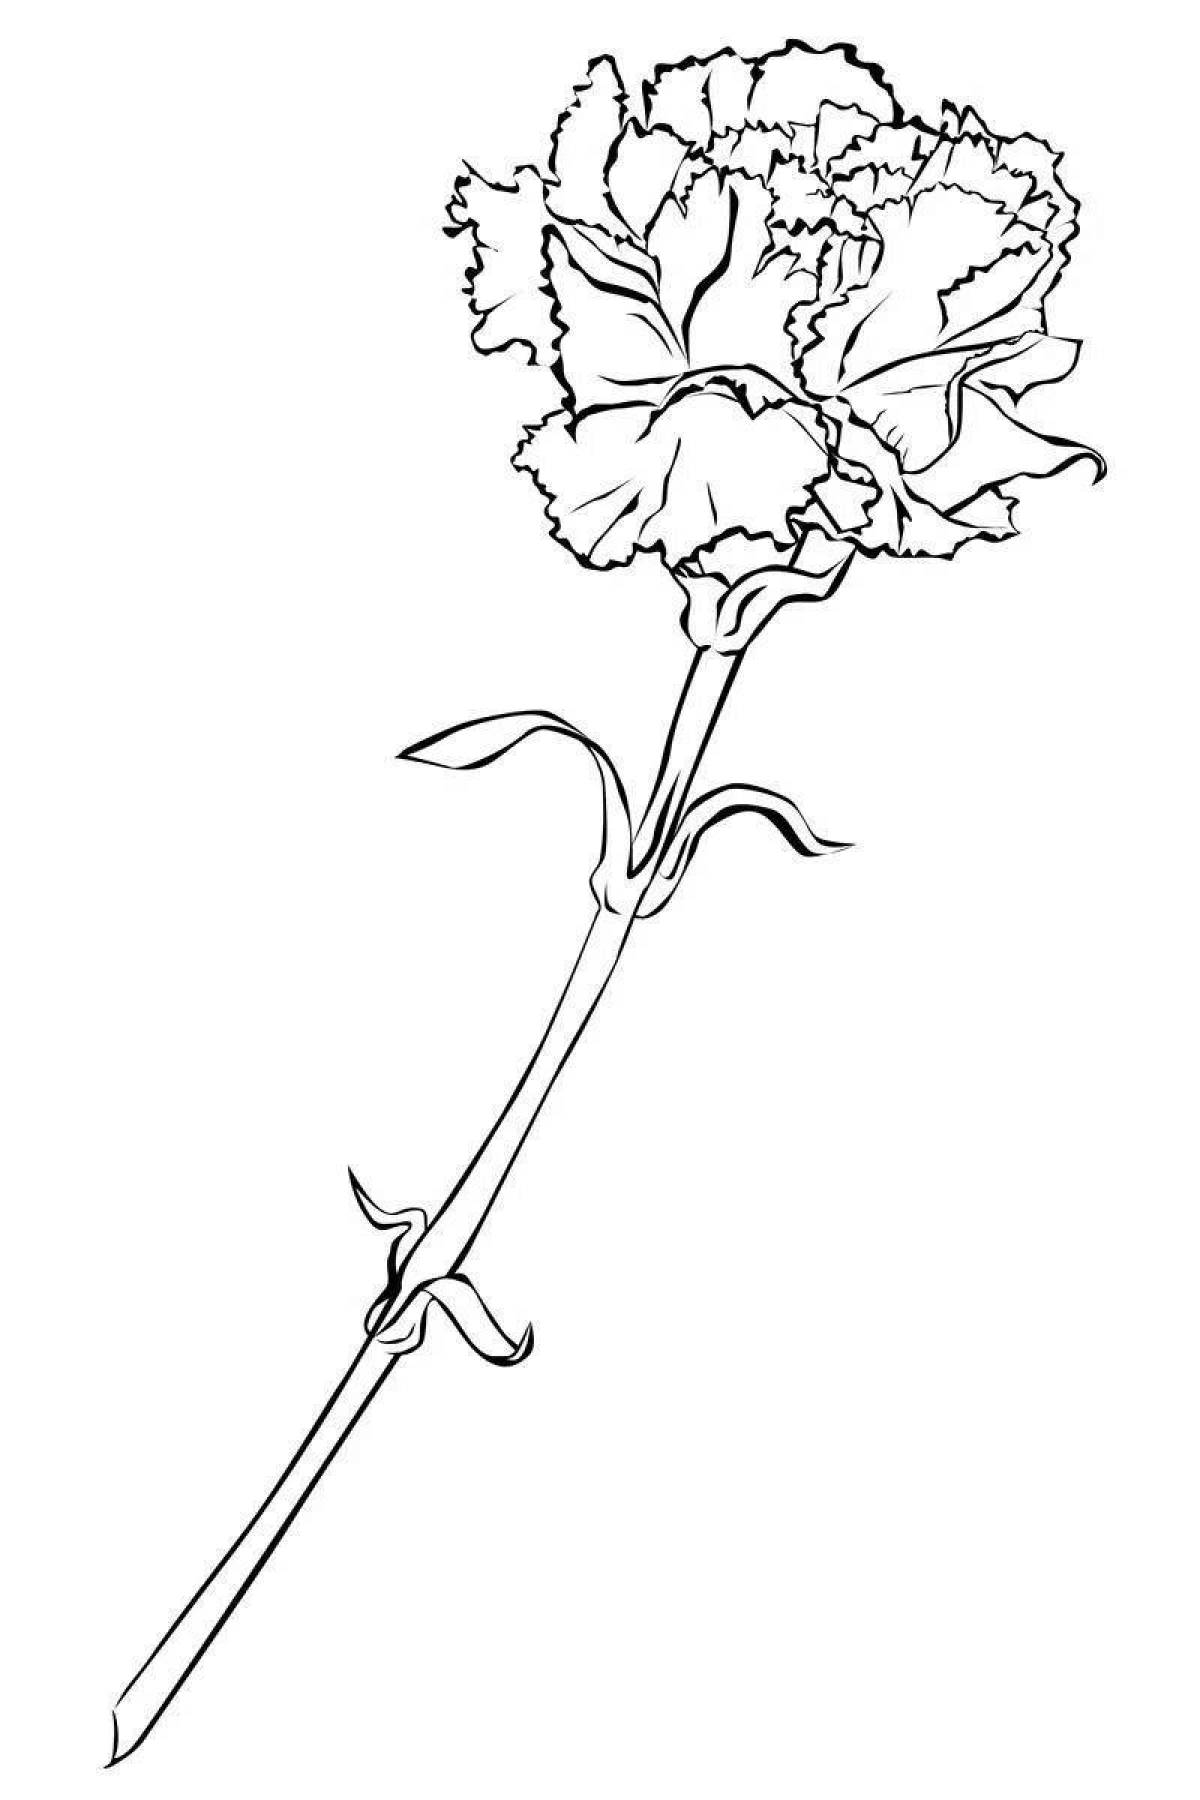 Coloring bouquet of carnations